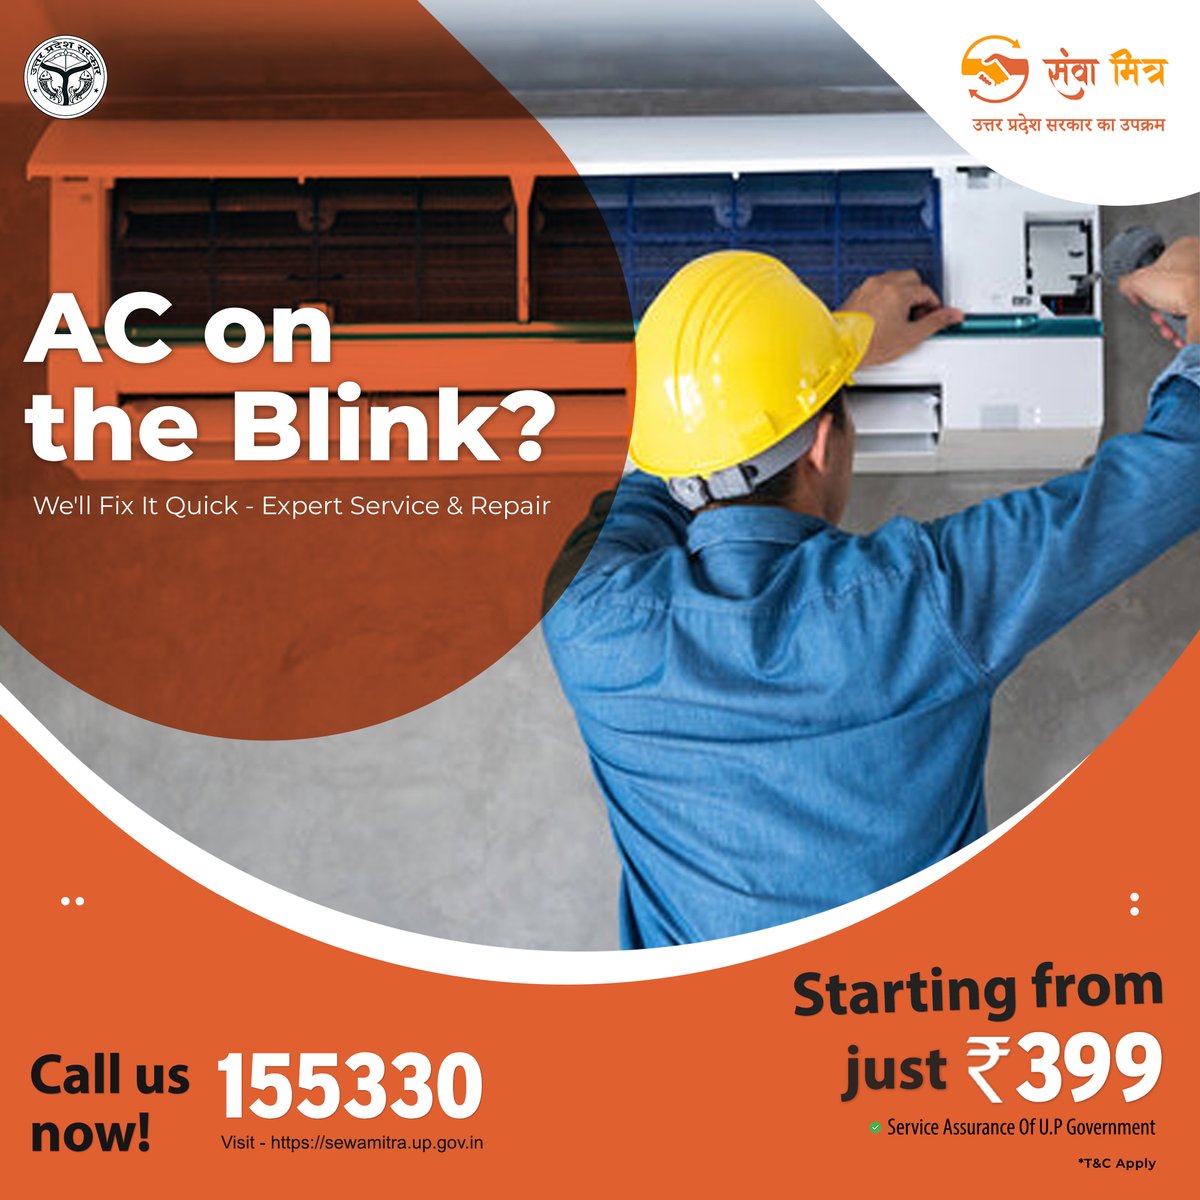 'Stay Cool, Stay Comfortable with AC the Blink.'

visit: sewamitra.up.gov.in
Call 155330 for Plumber Services!
#airconditioning #hvac #heating #hvaclife #airconditioner #hvacservice #ac #cooling #hvactechnician #hvactech #heatingandcooling 

— feeling chill in Uttar Pradesh.